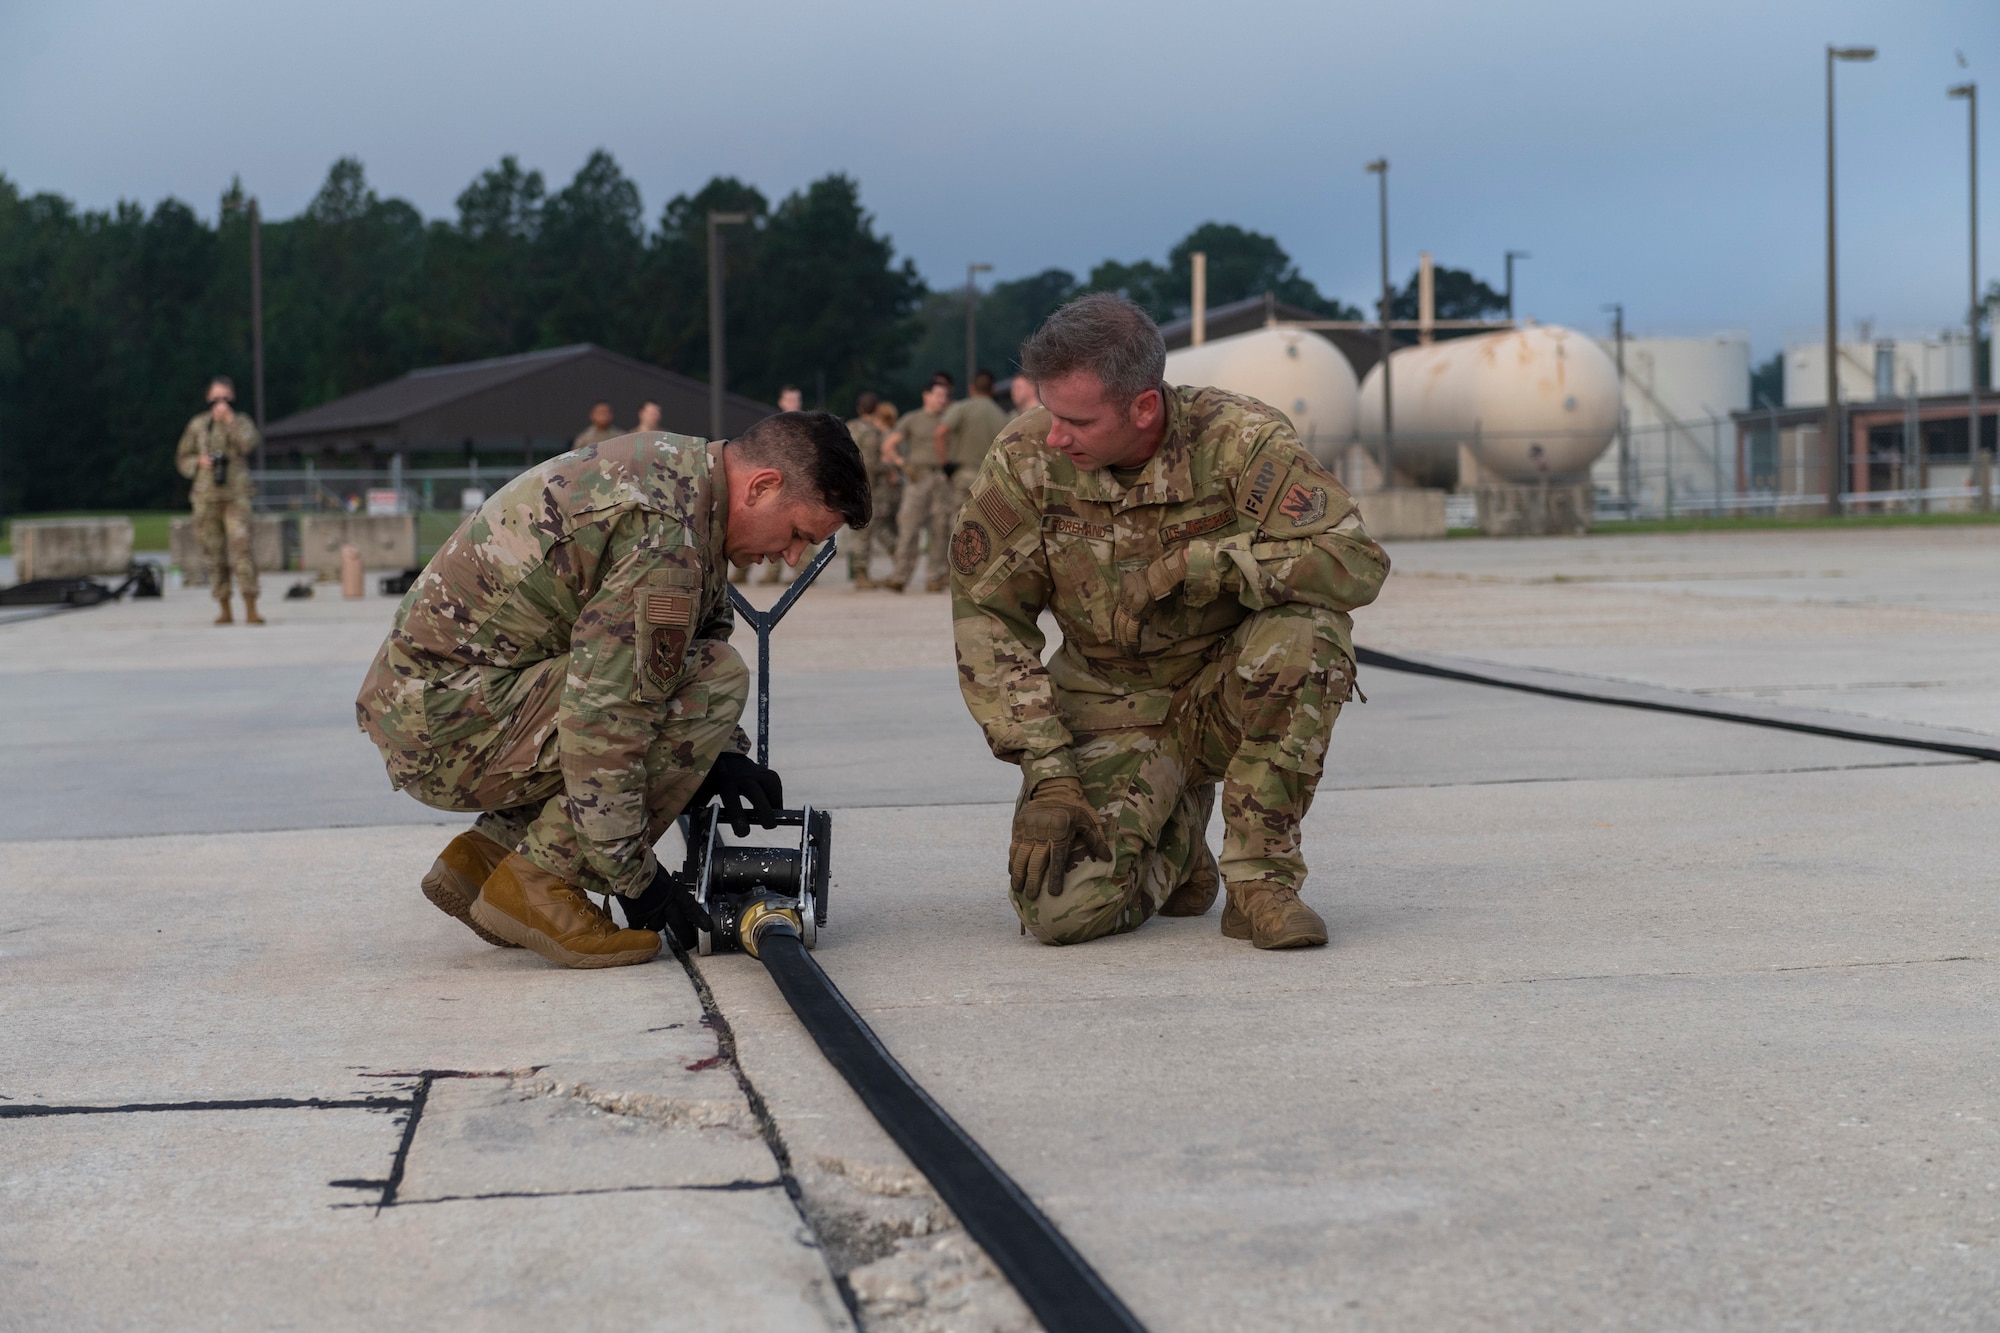 A photo of two airmen attaching a squeegee to a fuel hose.